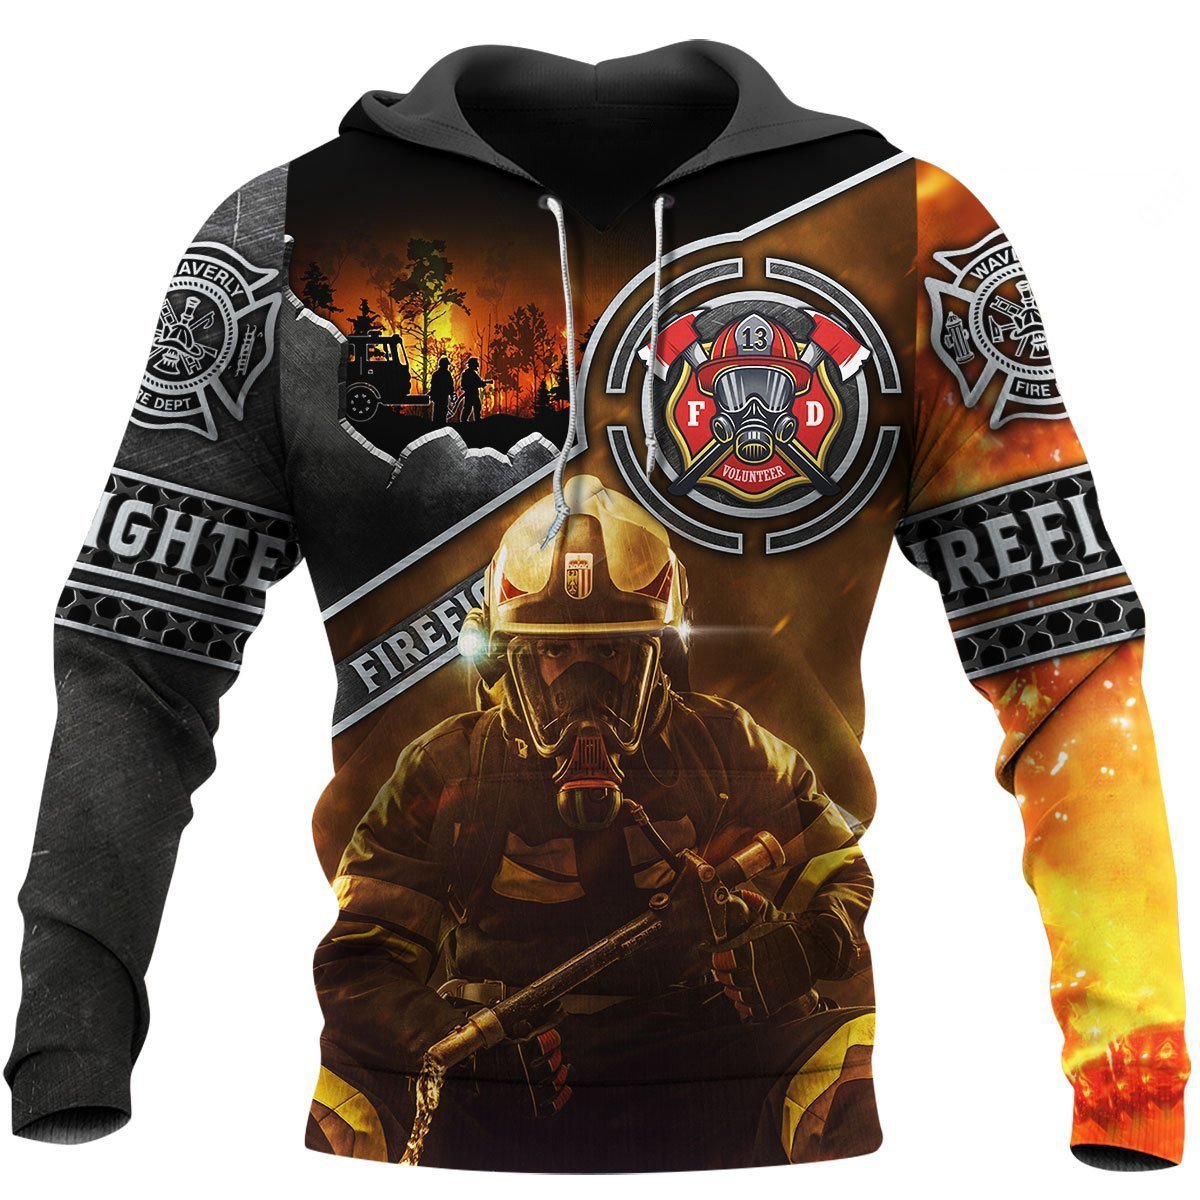 Brave Firefighter 3D All Over Printed Hoodie Shirt MP200304 - Amaze Style™-